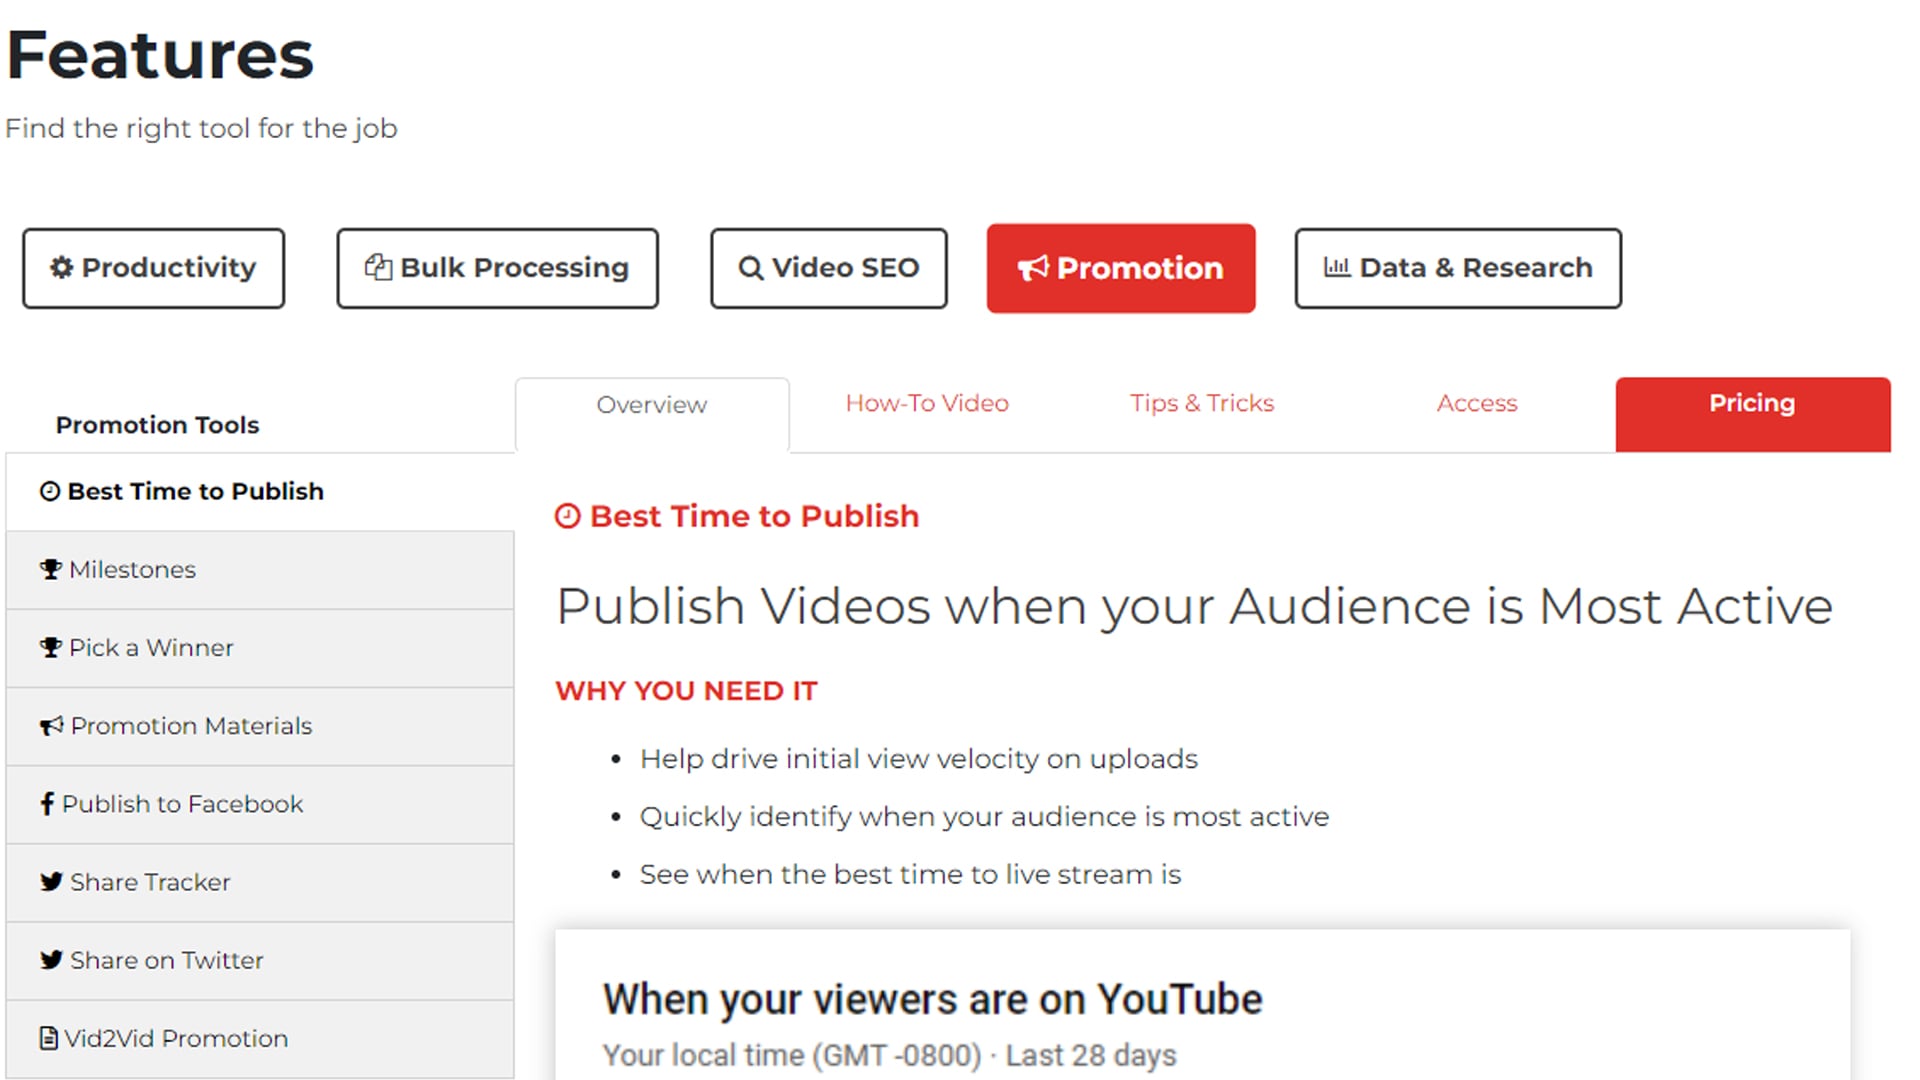 Showcasing TubeBuddy's features that assist in YouTube monetization.